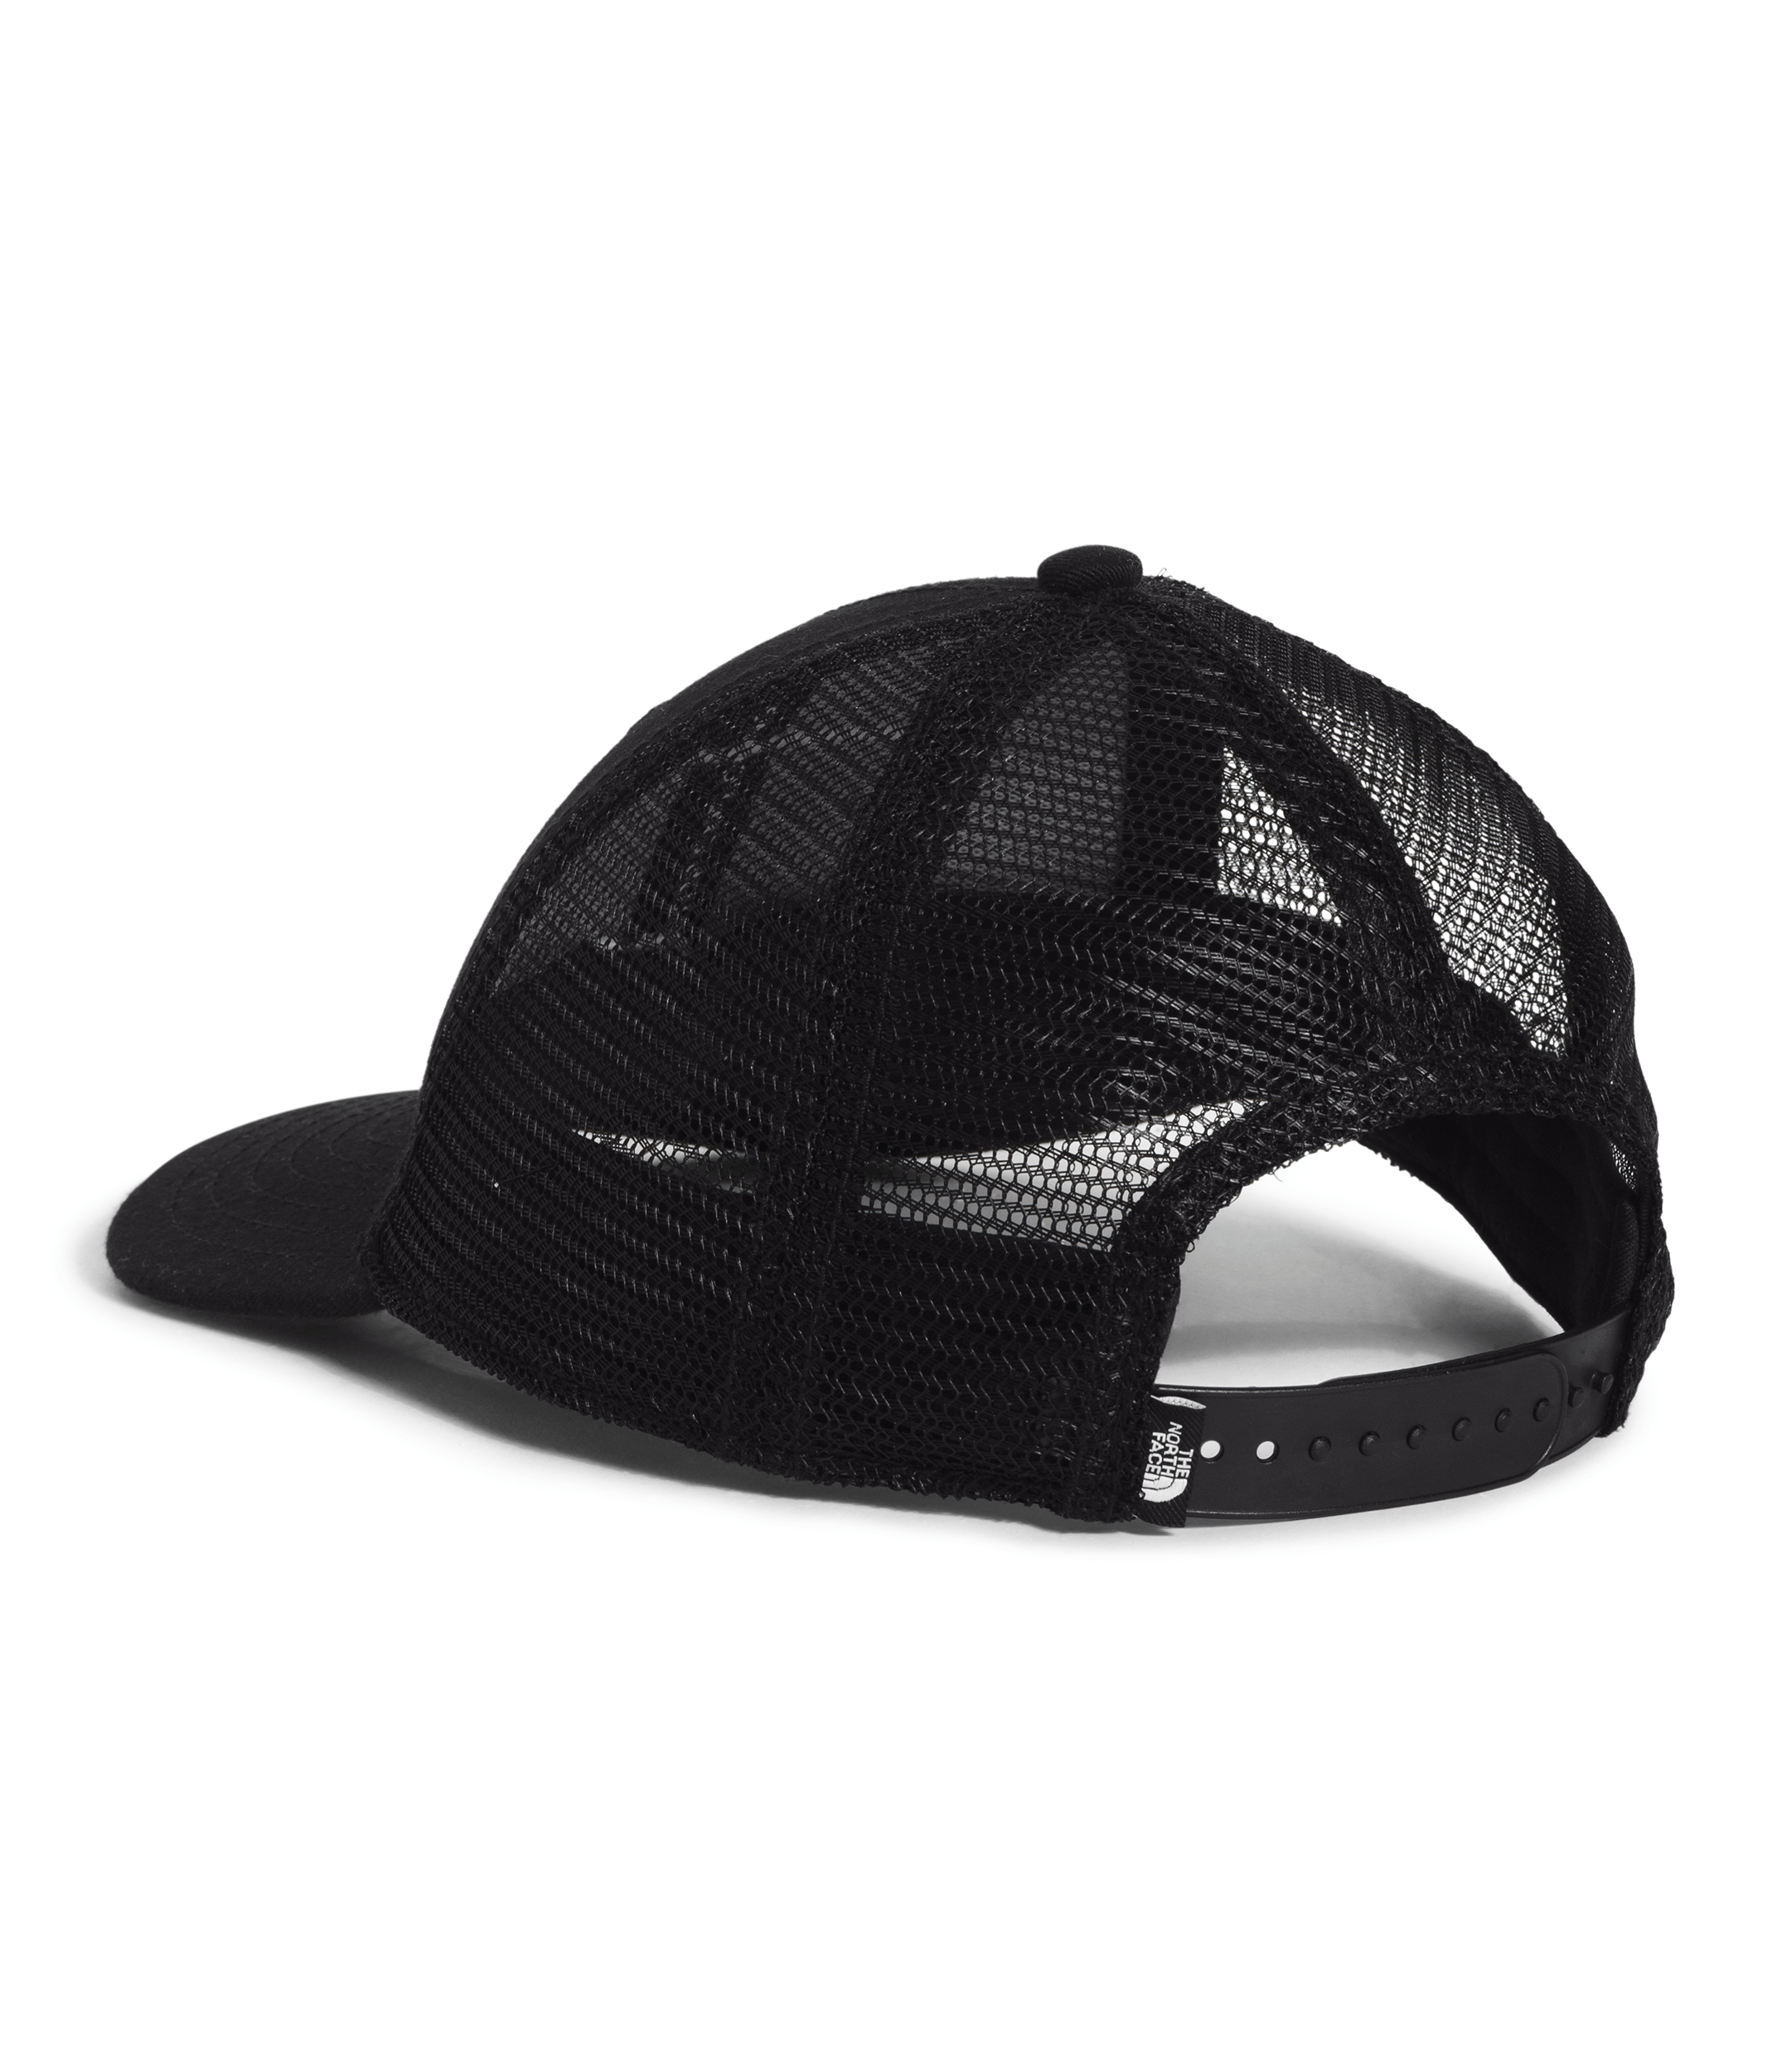 The North Face Kids' Mudder Trucker - Mountain Kids Outfitters: TNF Black Color - White Background back view